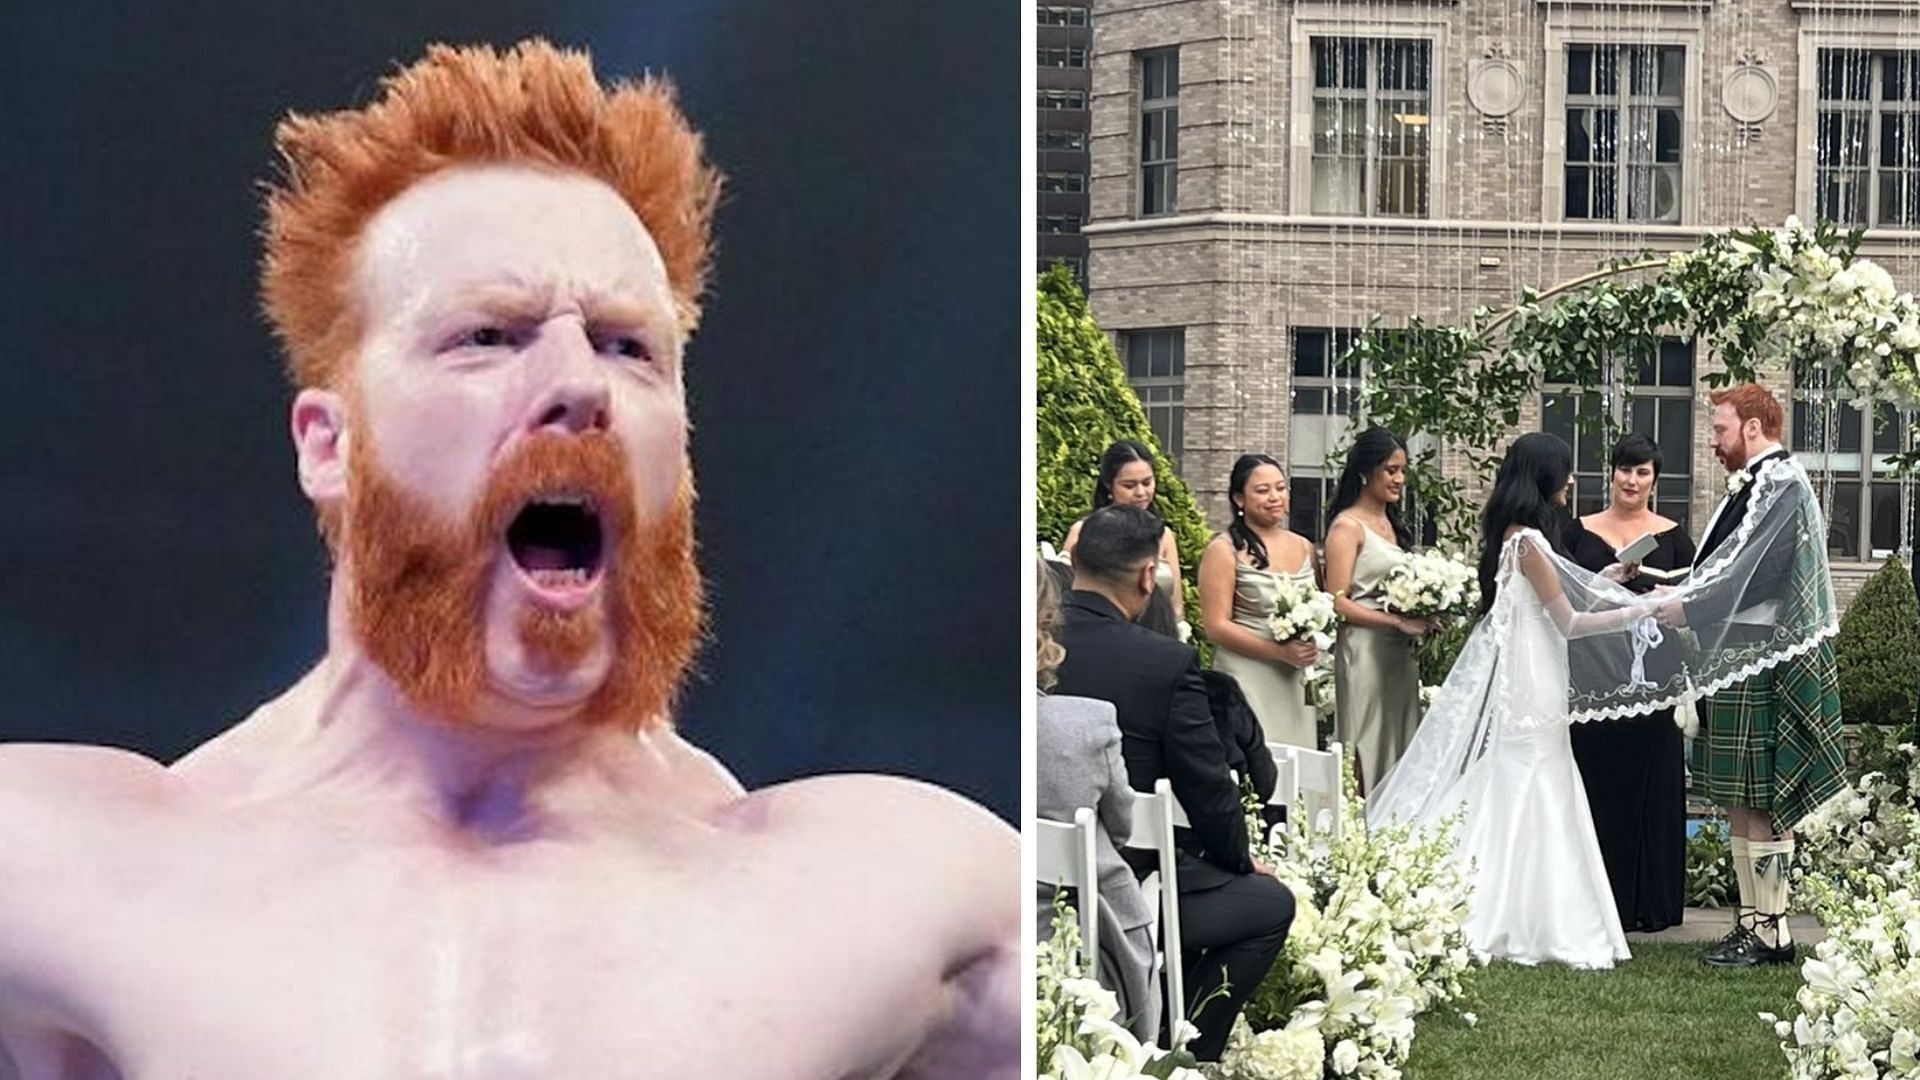 Sheamus ties the knot with his now wife Isabella Revilla